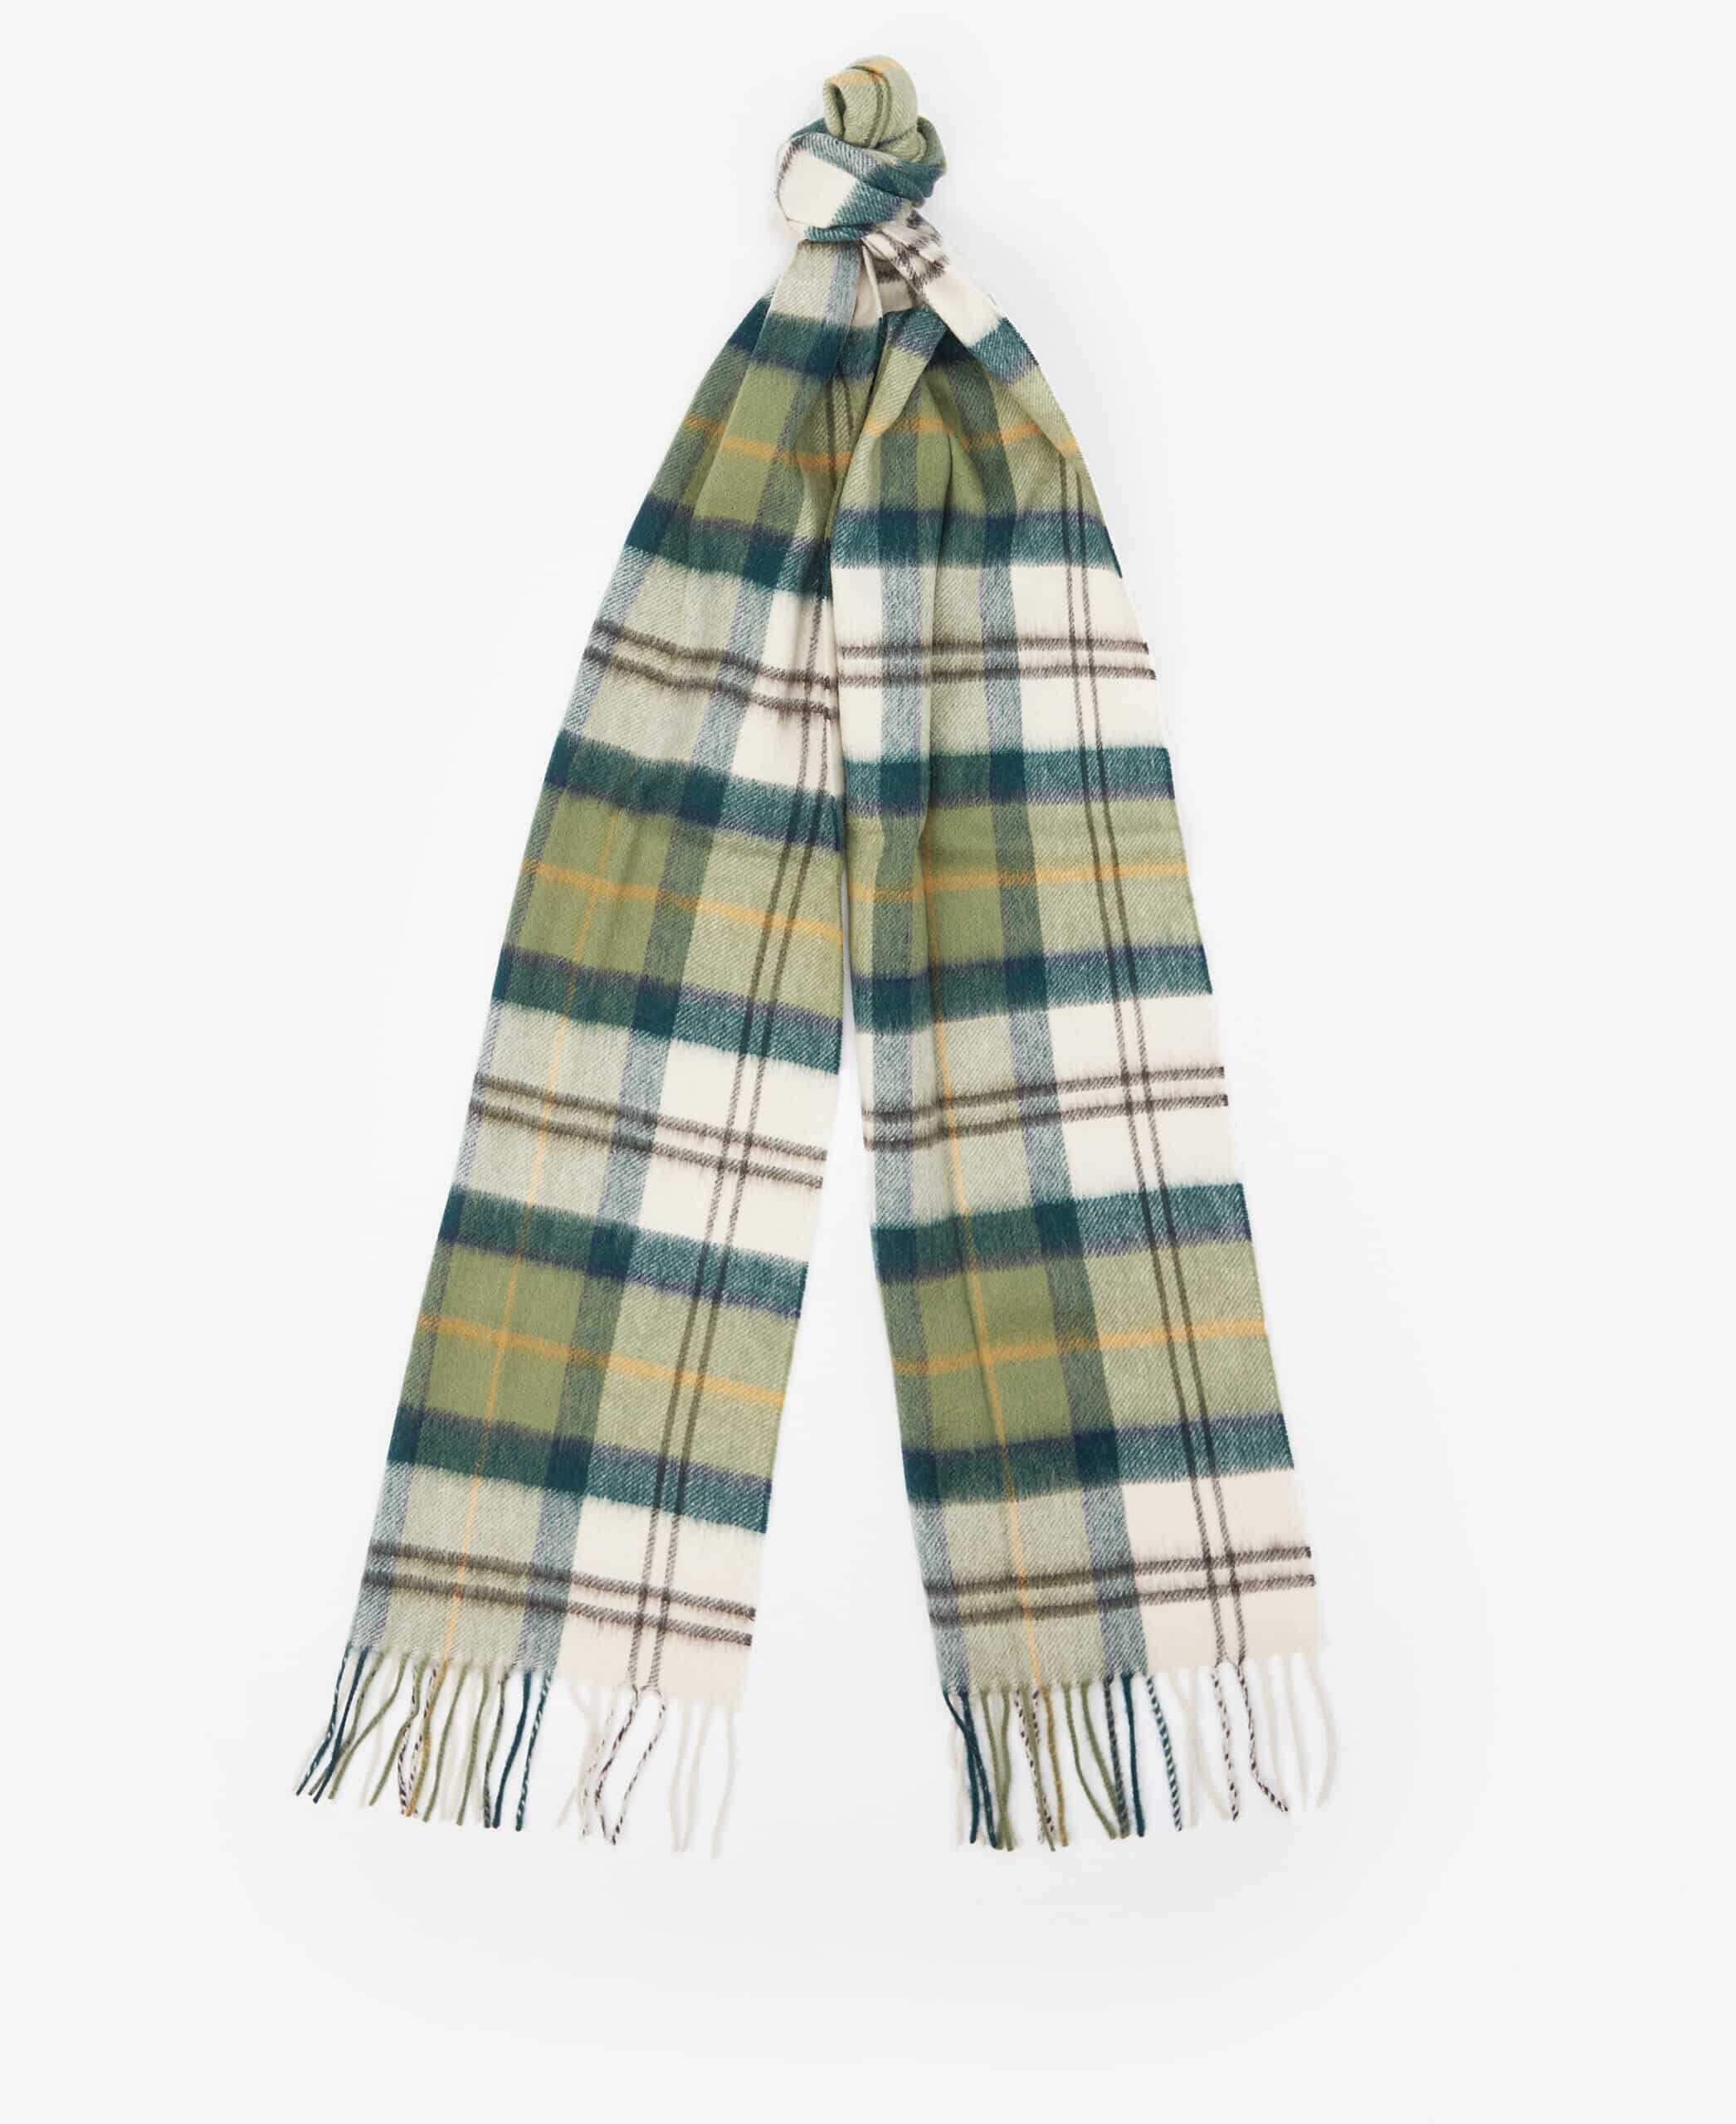 Lambswool and Cashmere Scarf – Light Green Tartan